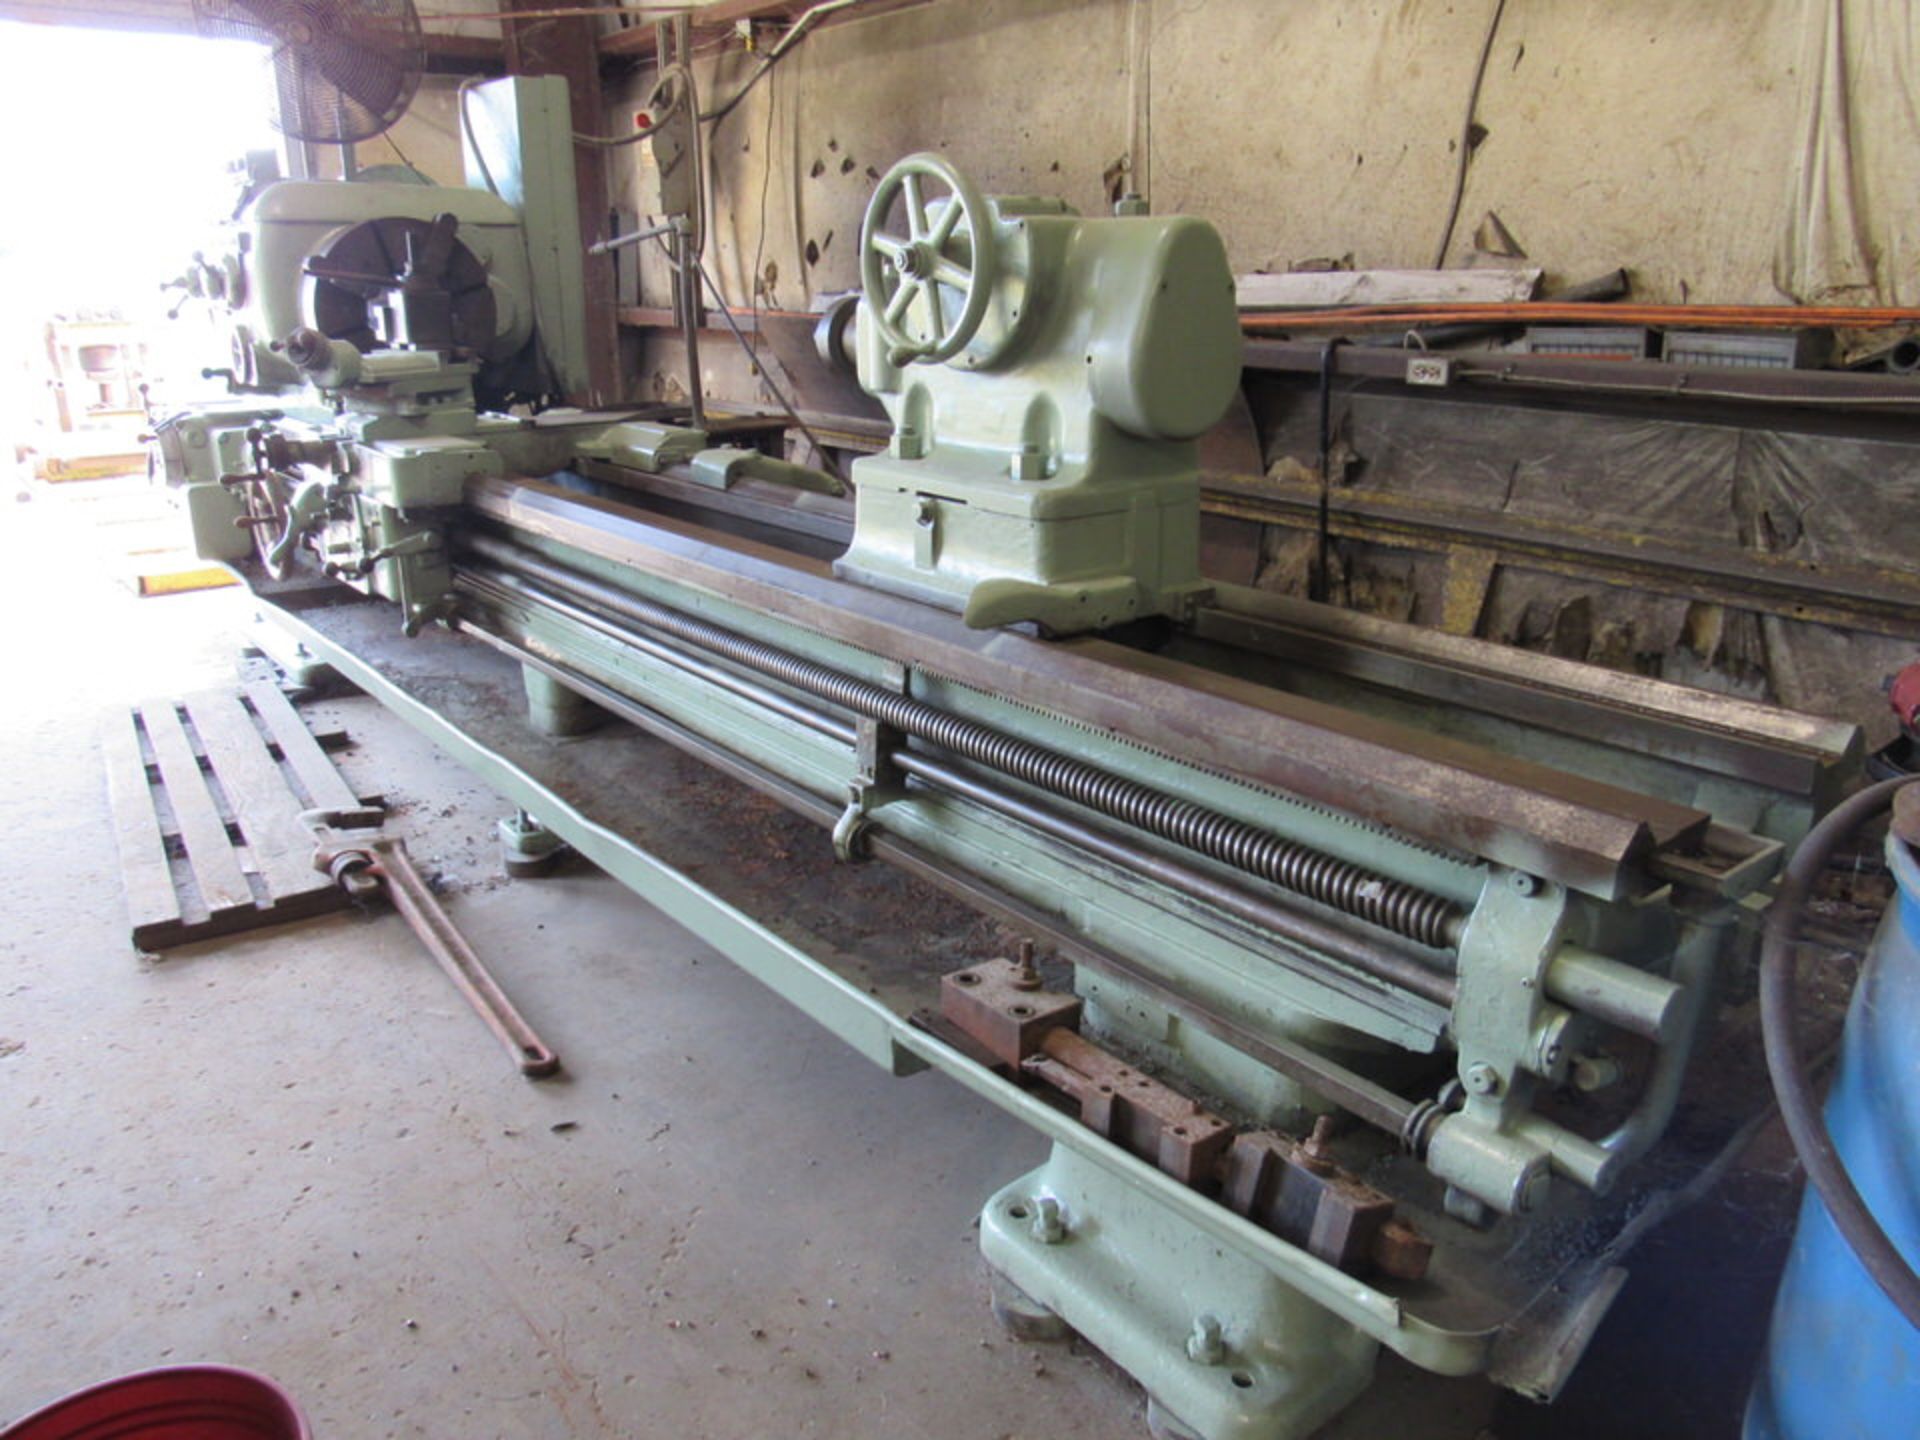 Lodge & Shipley 25" Standard Engine Lathe, 24" swing, 144" bed length, 21" 4-jaw front and rear - Image 4 of 14